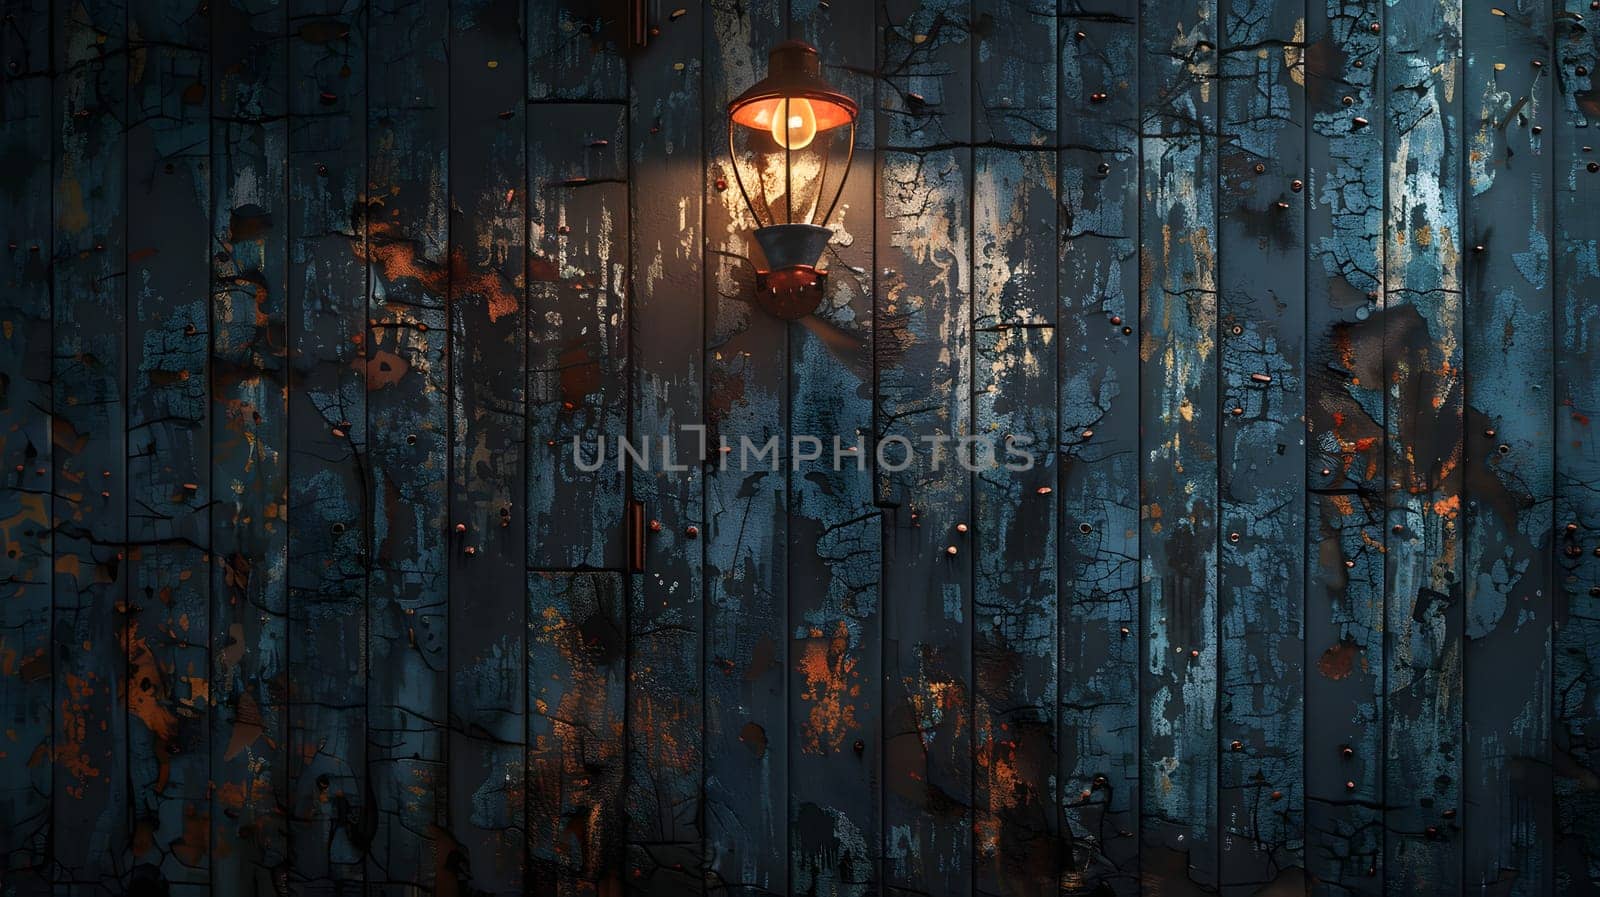 A wooden wall adorned with a lamp hanging from it, illuminating the natural landscape of grass and twigs in the darkness of midnight